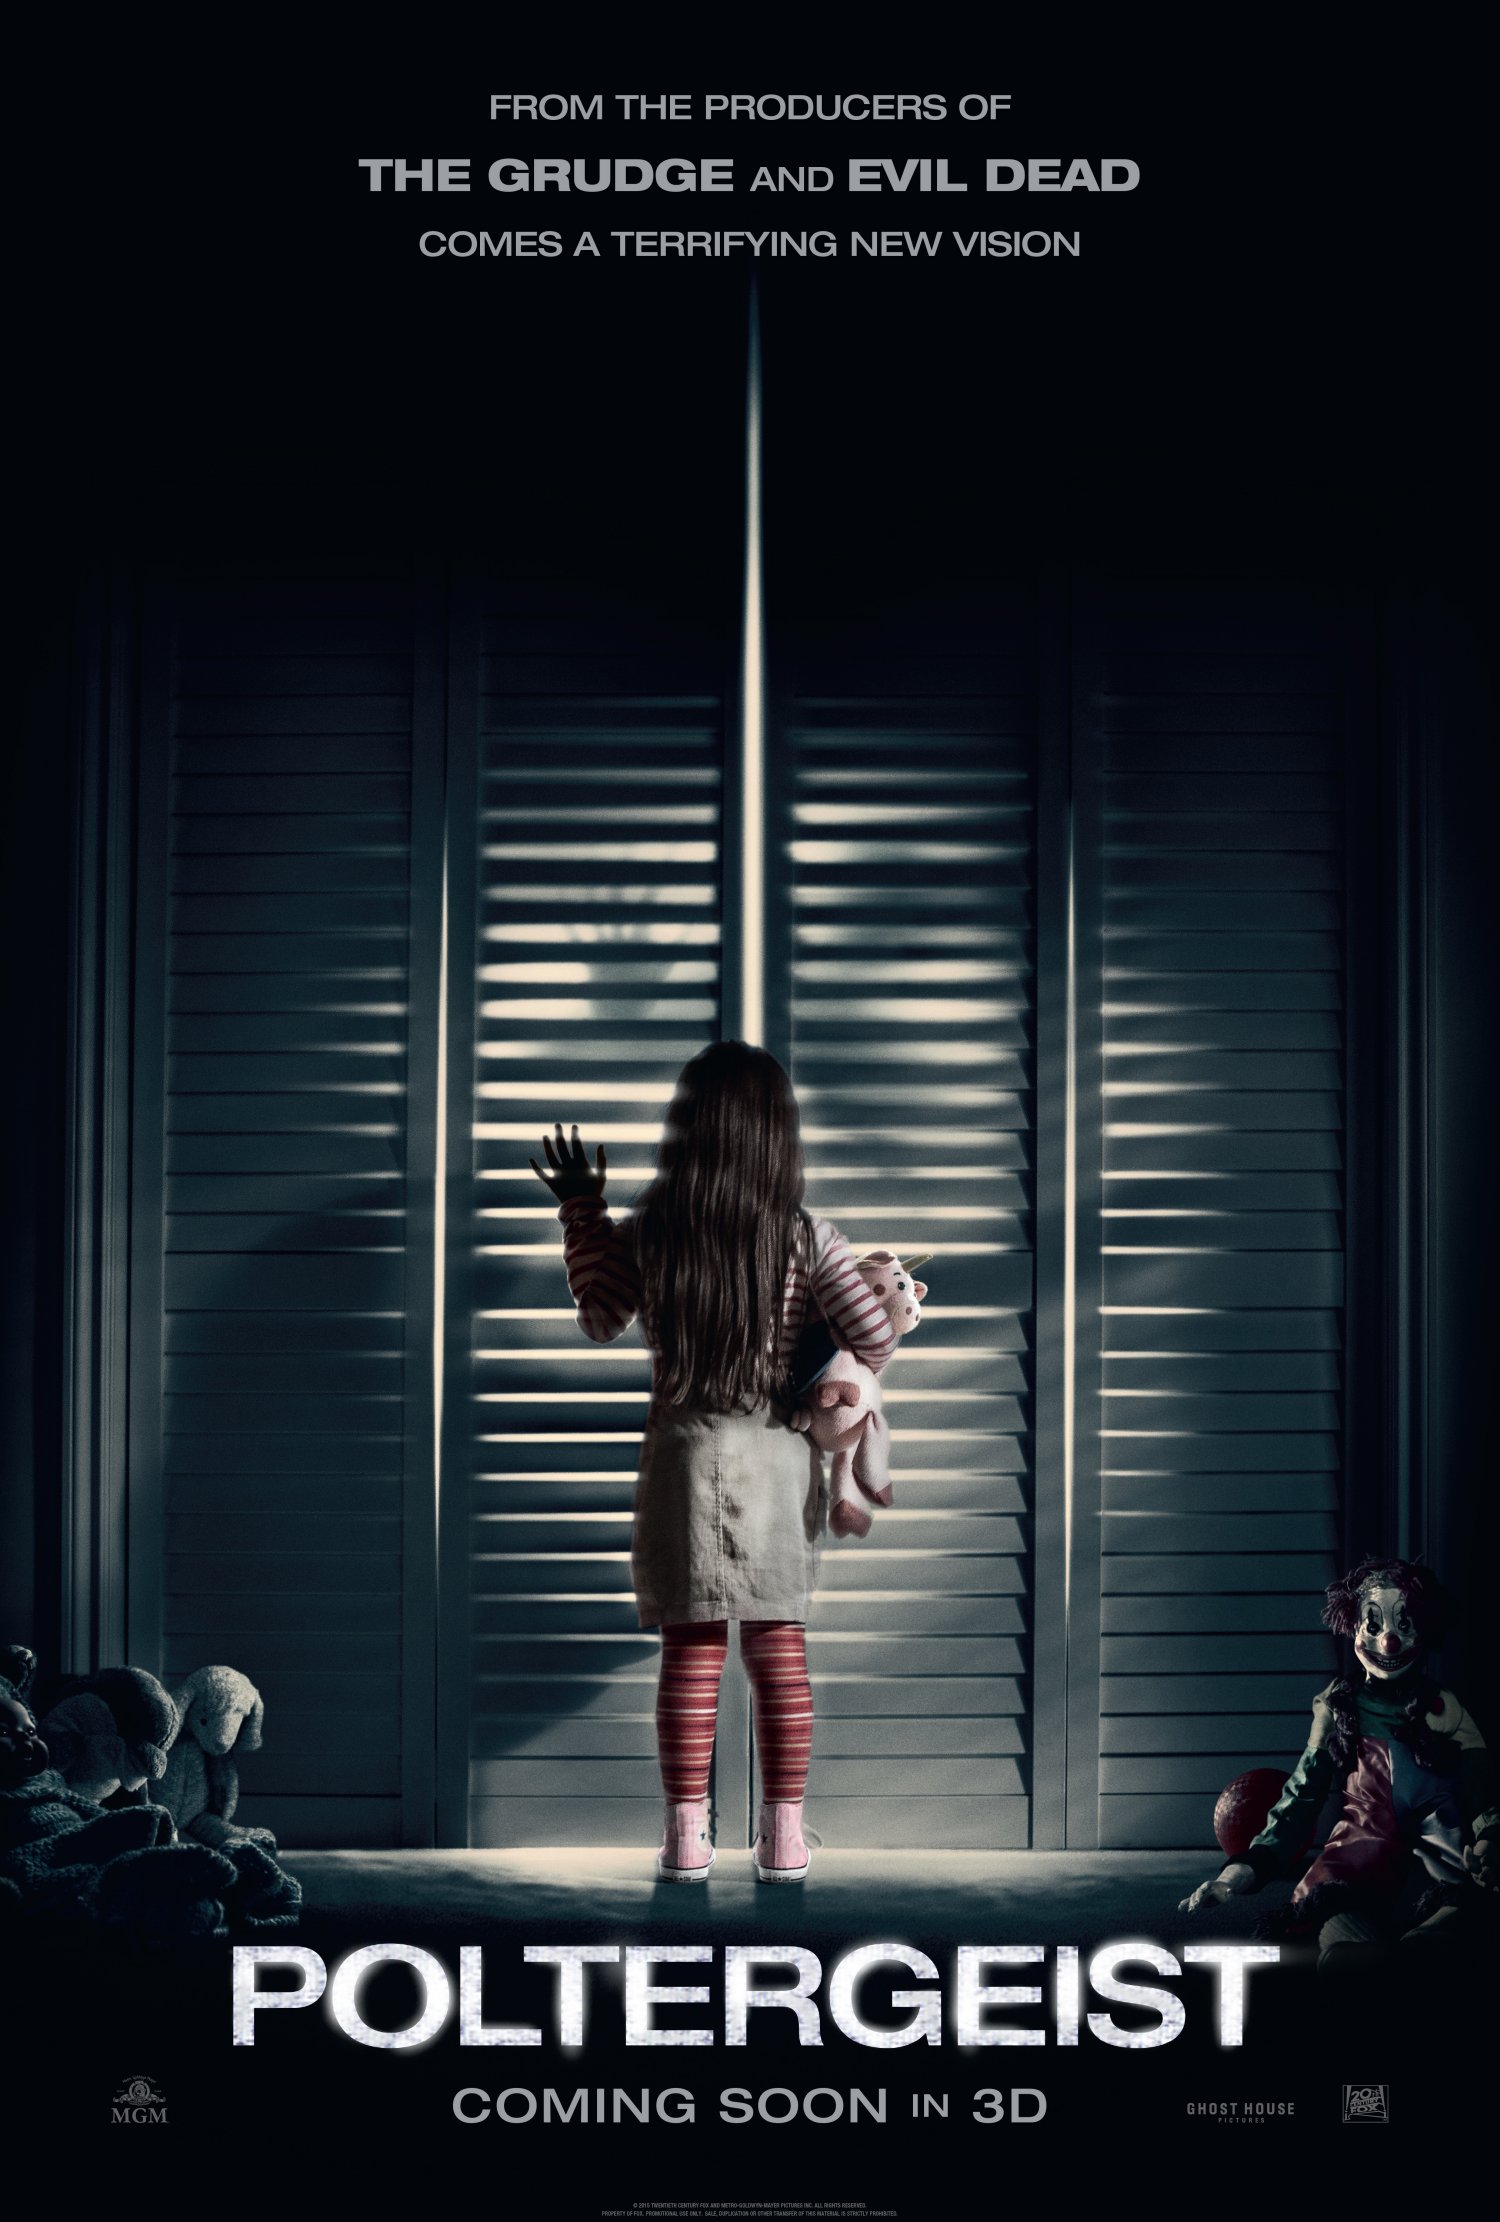 Poltergeist film review: It’s heeeere, but should you see it?